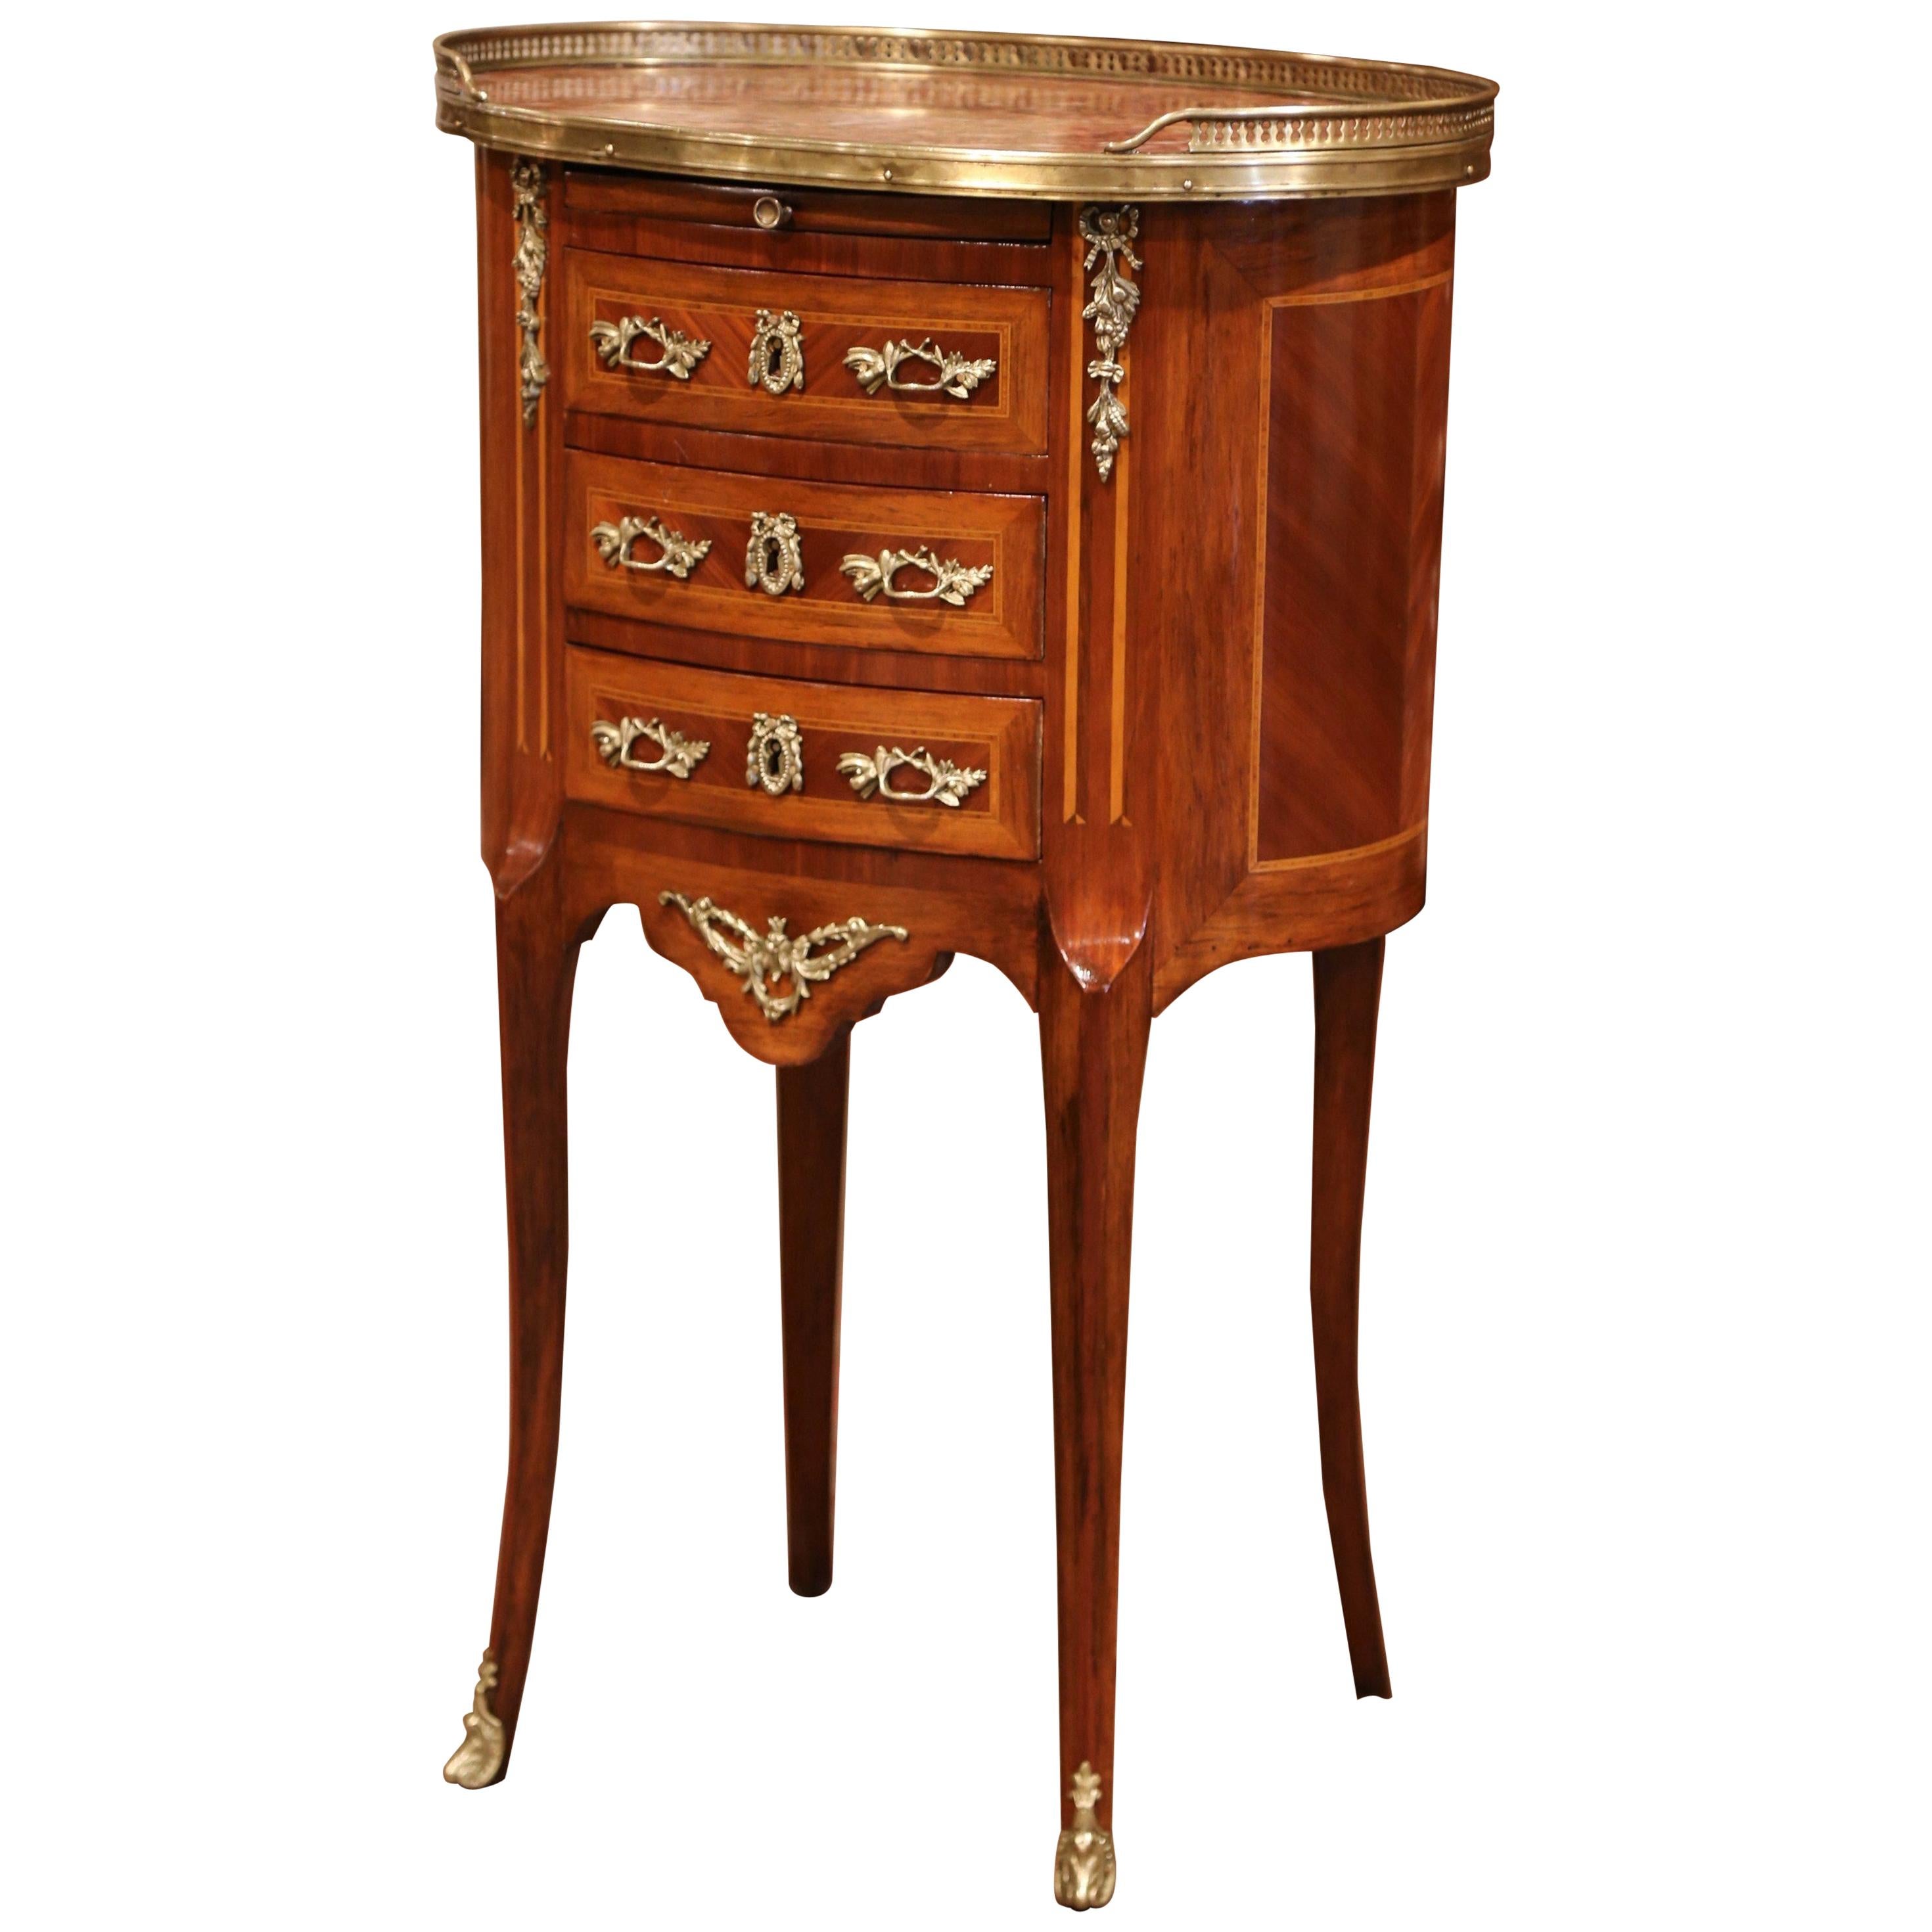 19th Century French Walnut Parquetry and Inlay Chest of Drawers with Marble Top